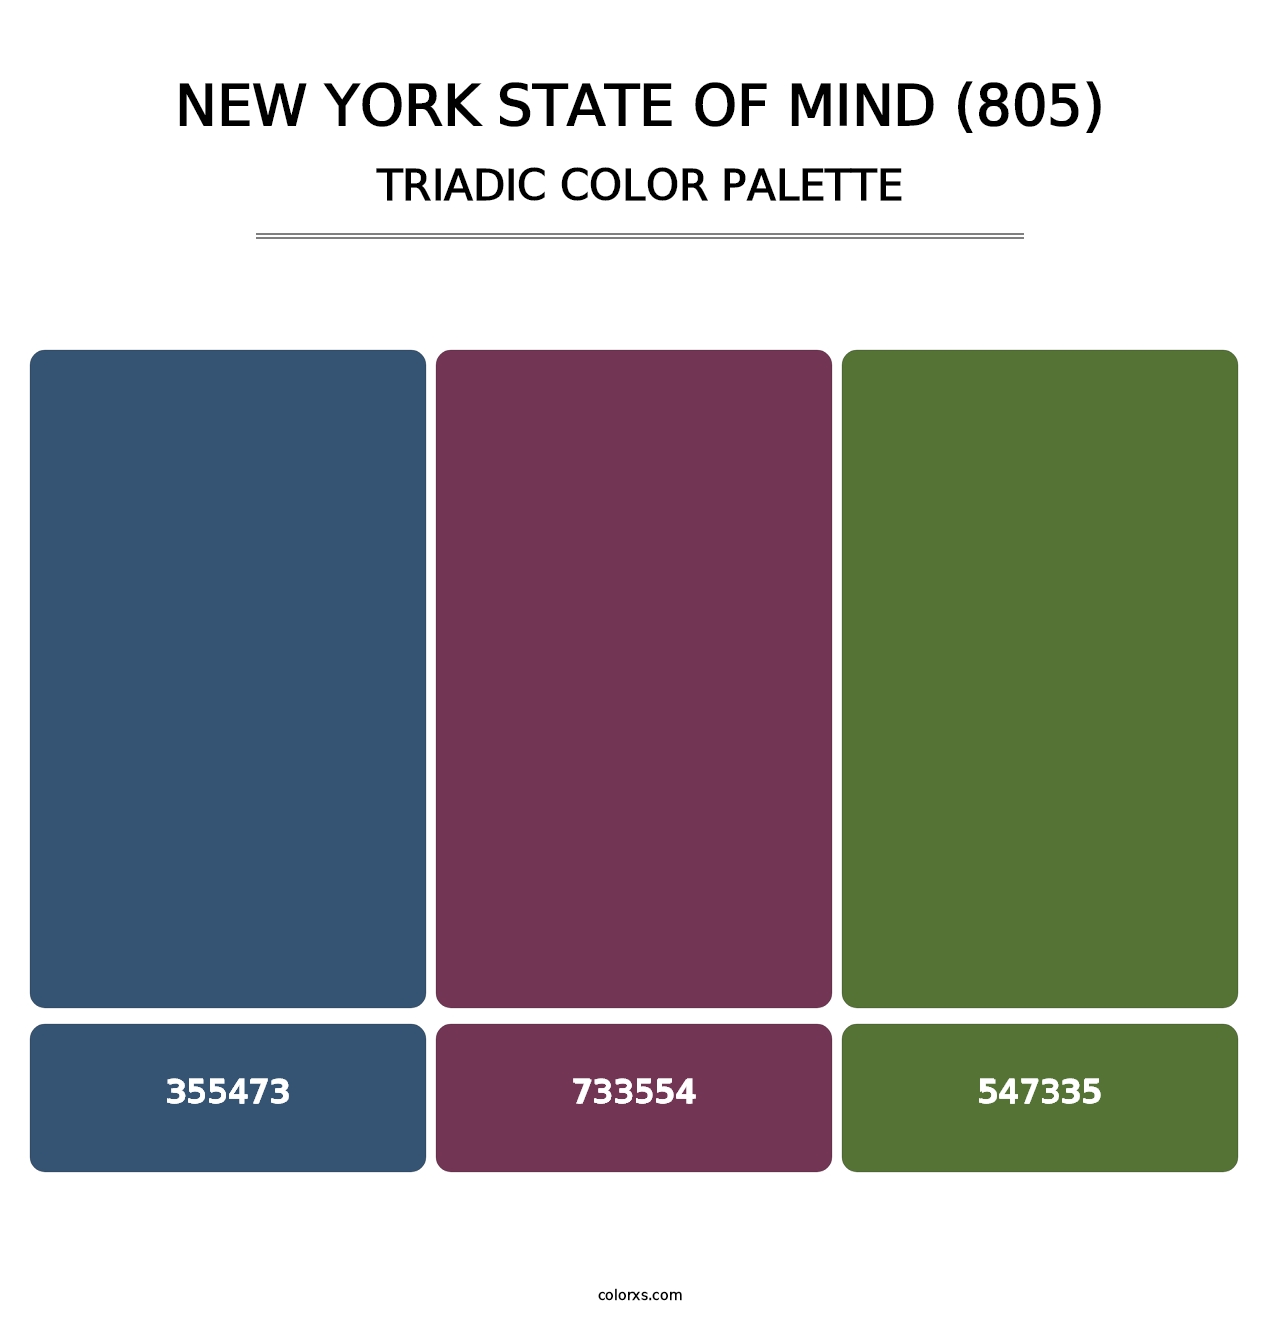 New York State of Mind (805) - Triadic Color Palette